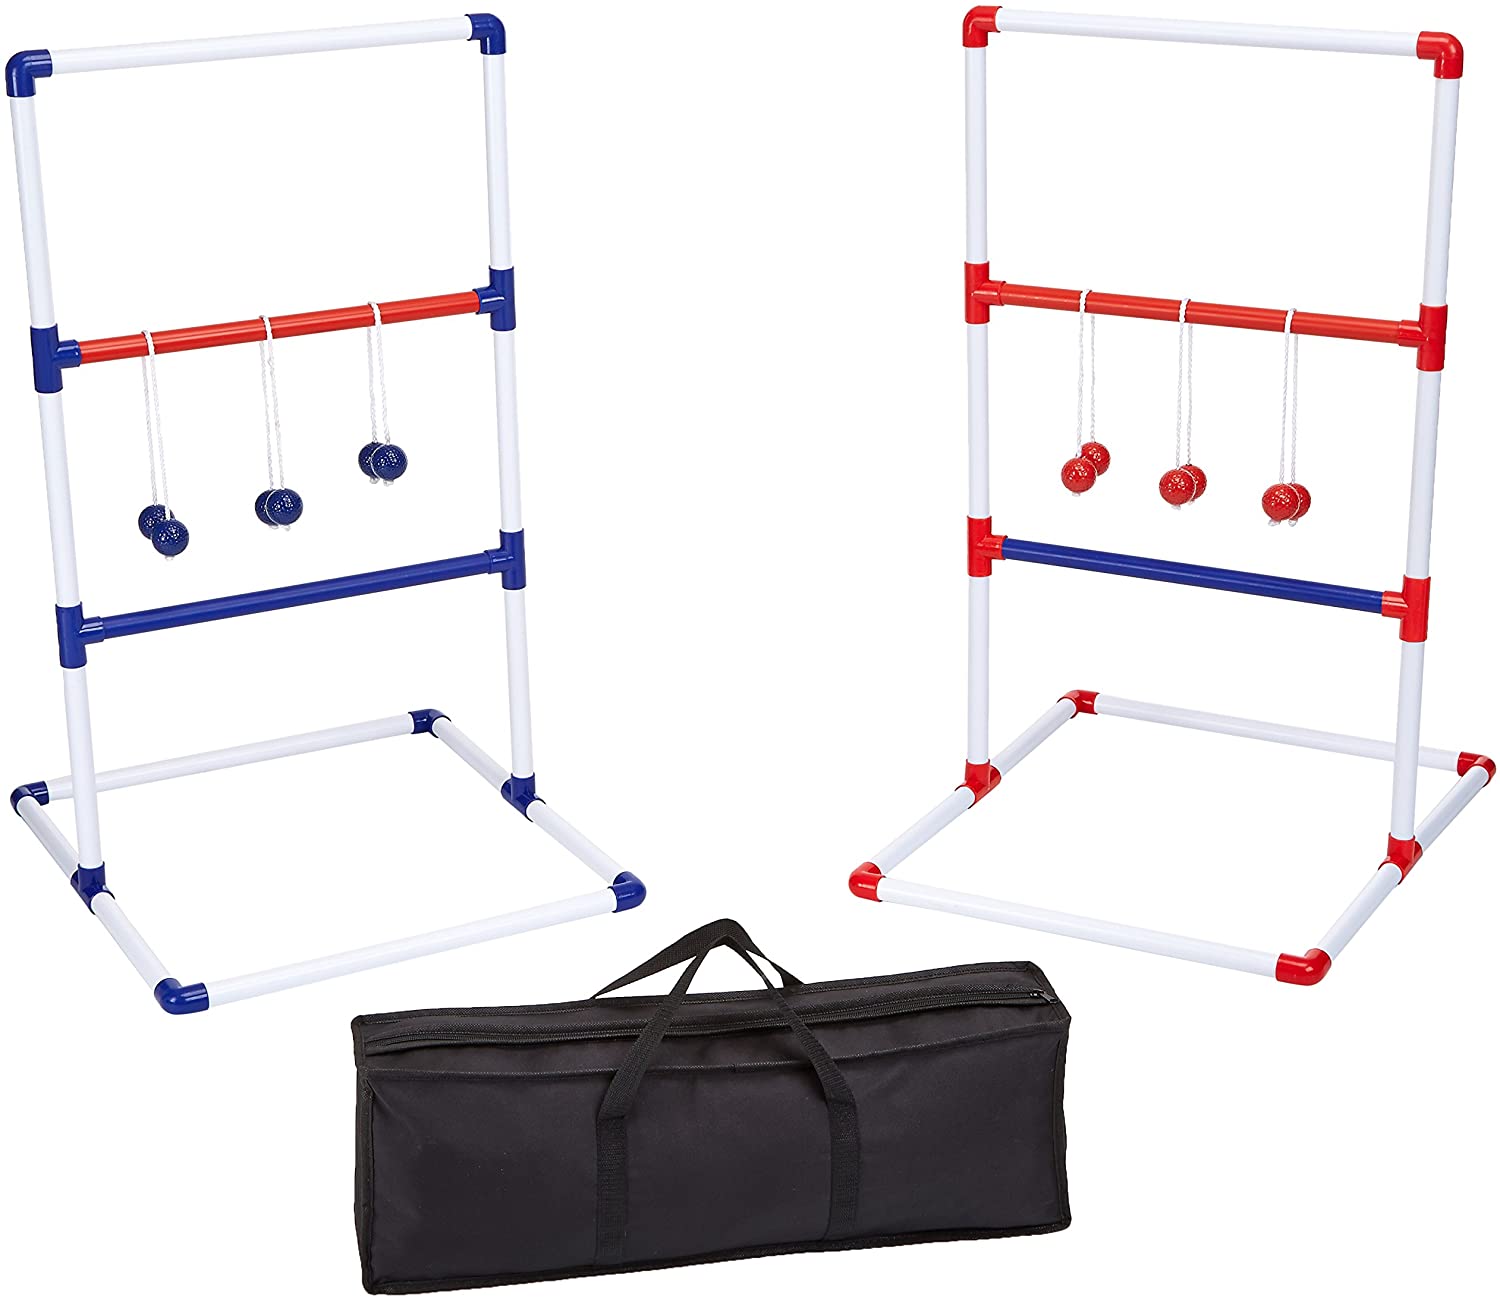 Ladder golf set with carry case